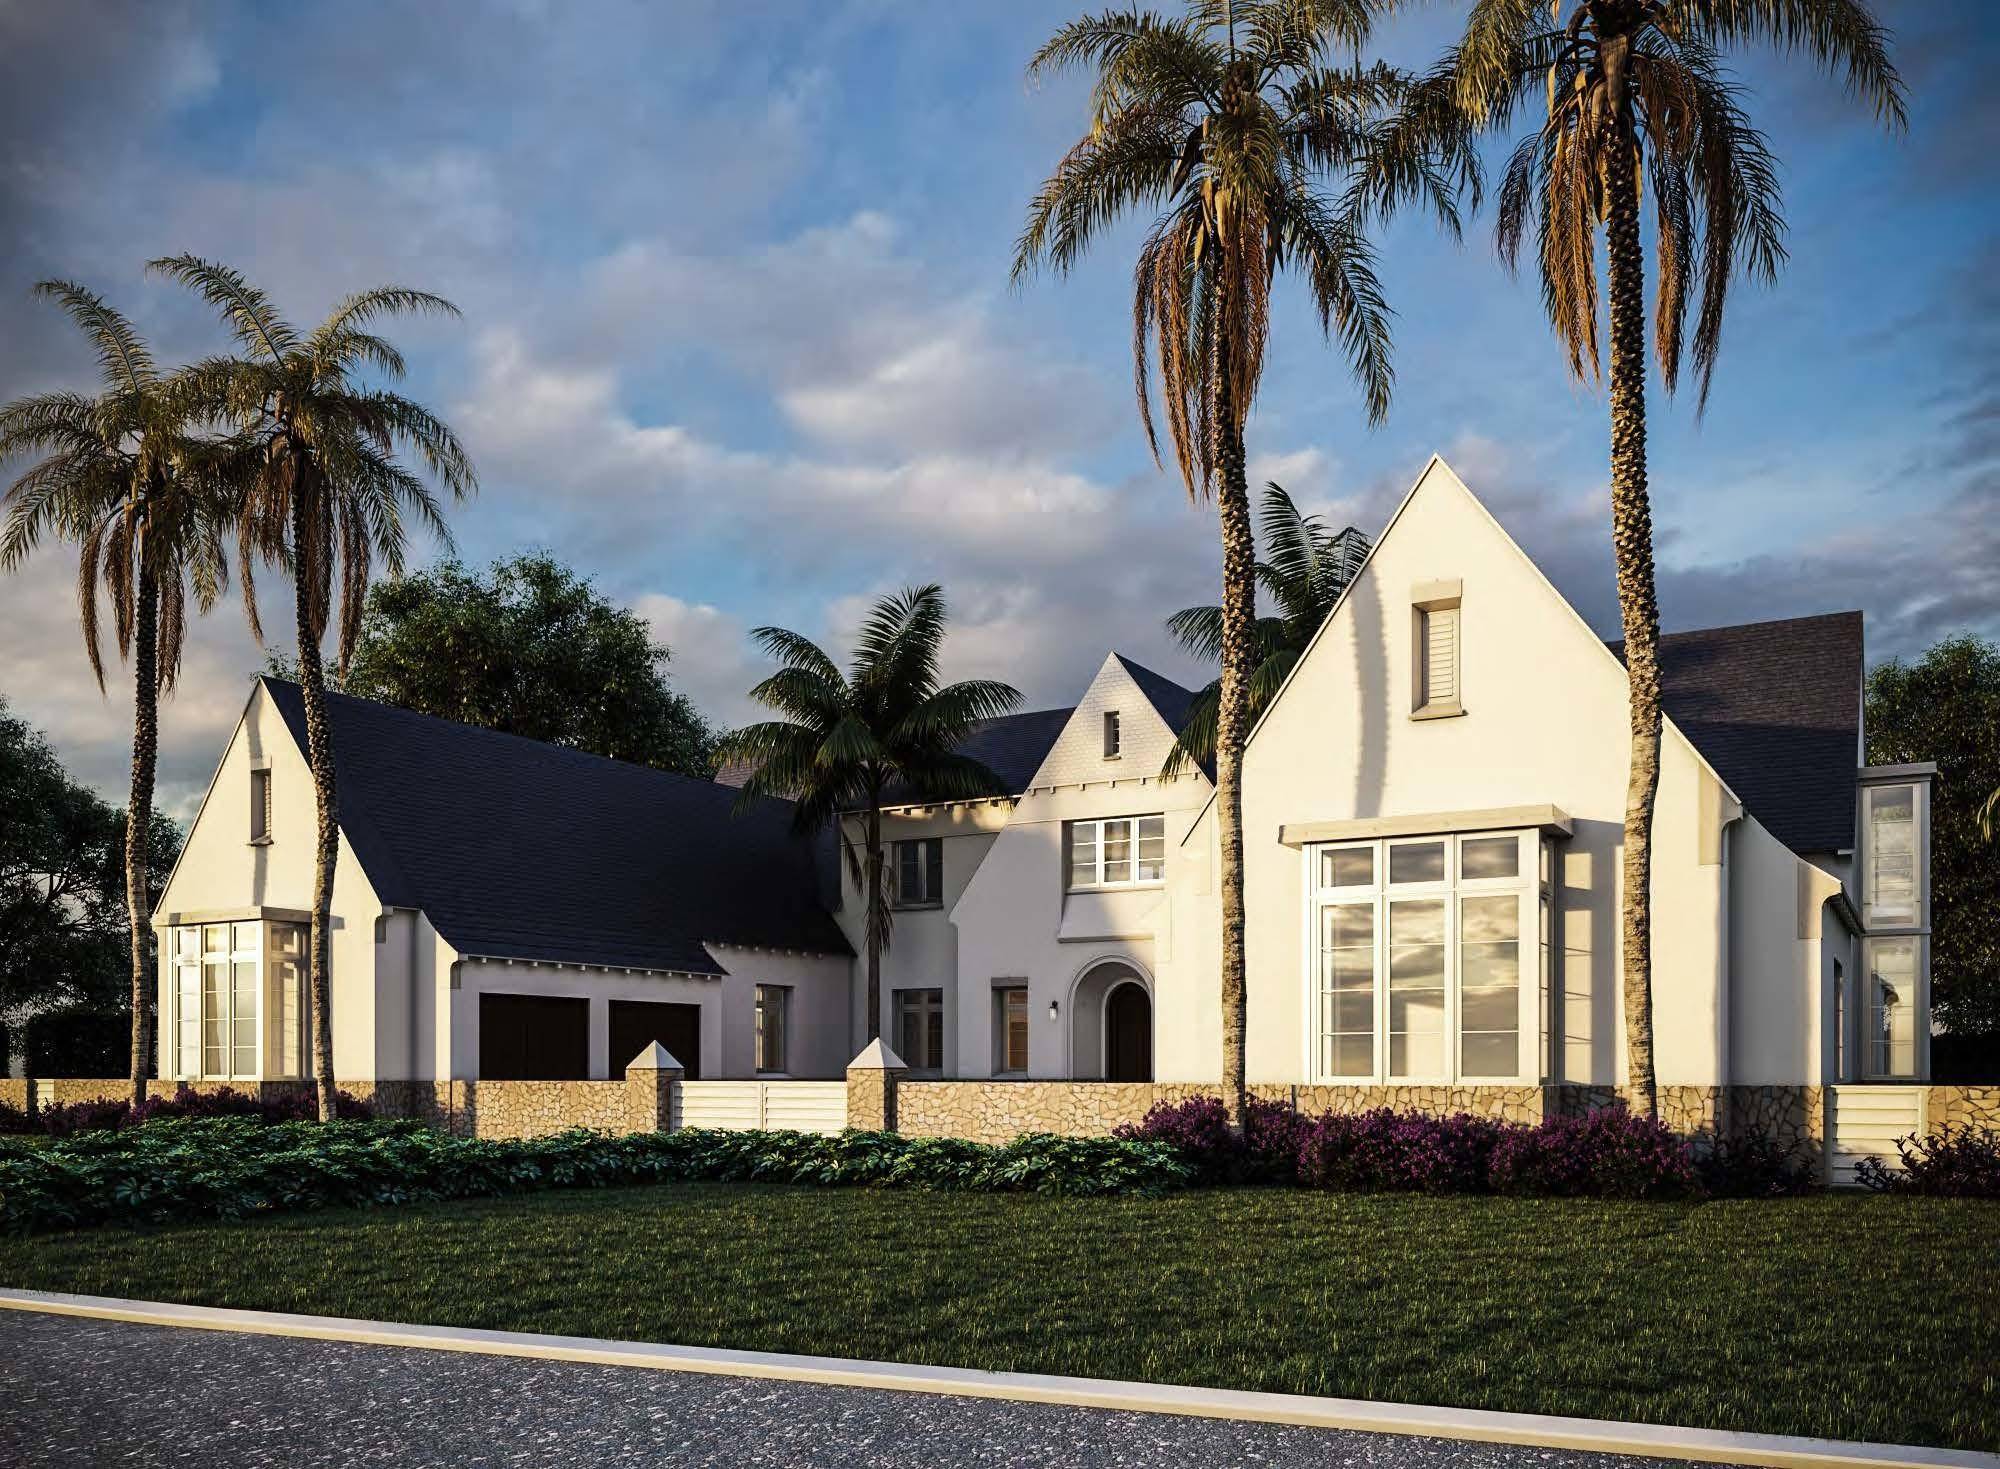 NEW CONSTRUCTION Designed by the world renowned and award winning architect, Portuondo Perotti, this custom home is situated on a premier lot in the exclusive Cypress Island community with sweeping ...